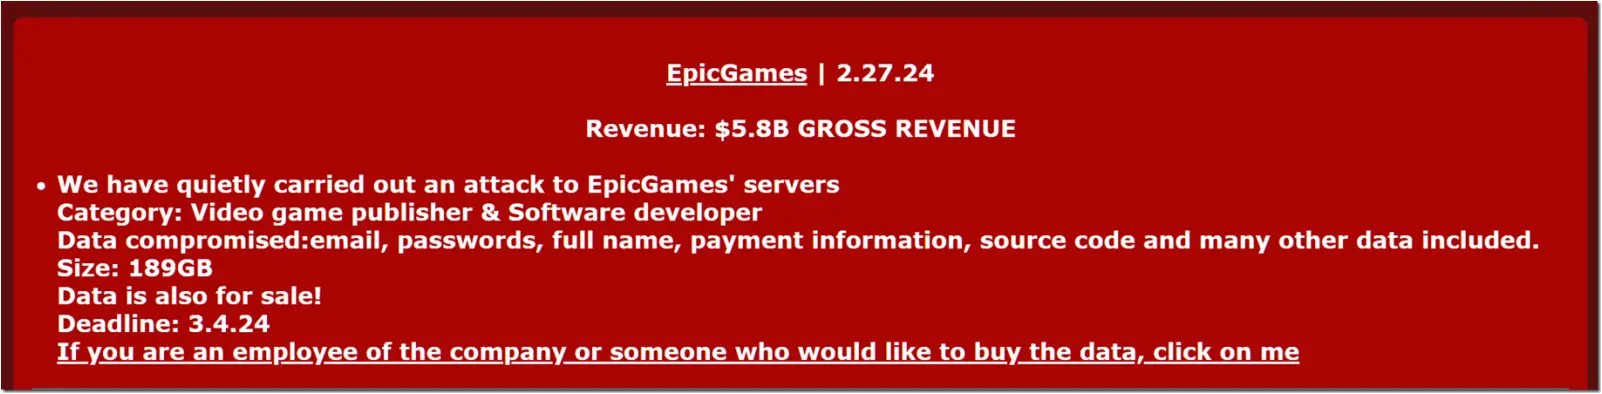 Mogilevich claiming to be selling data stolen from Epic Games